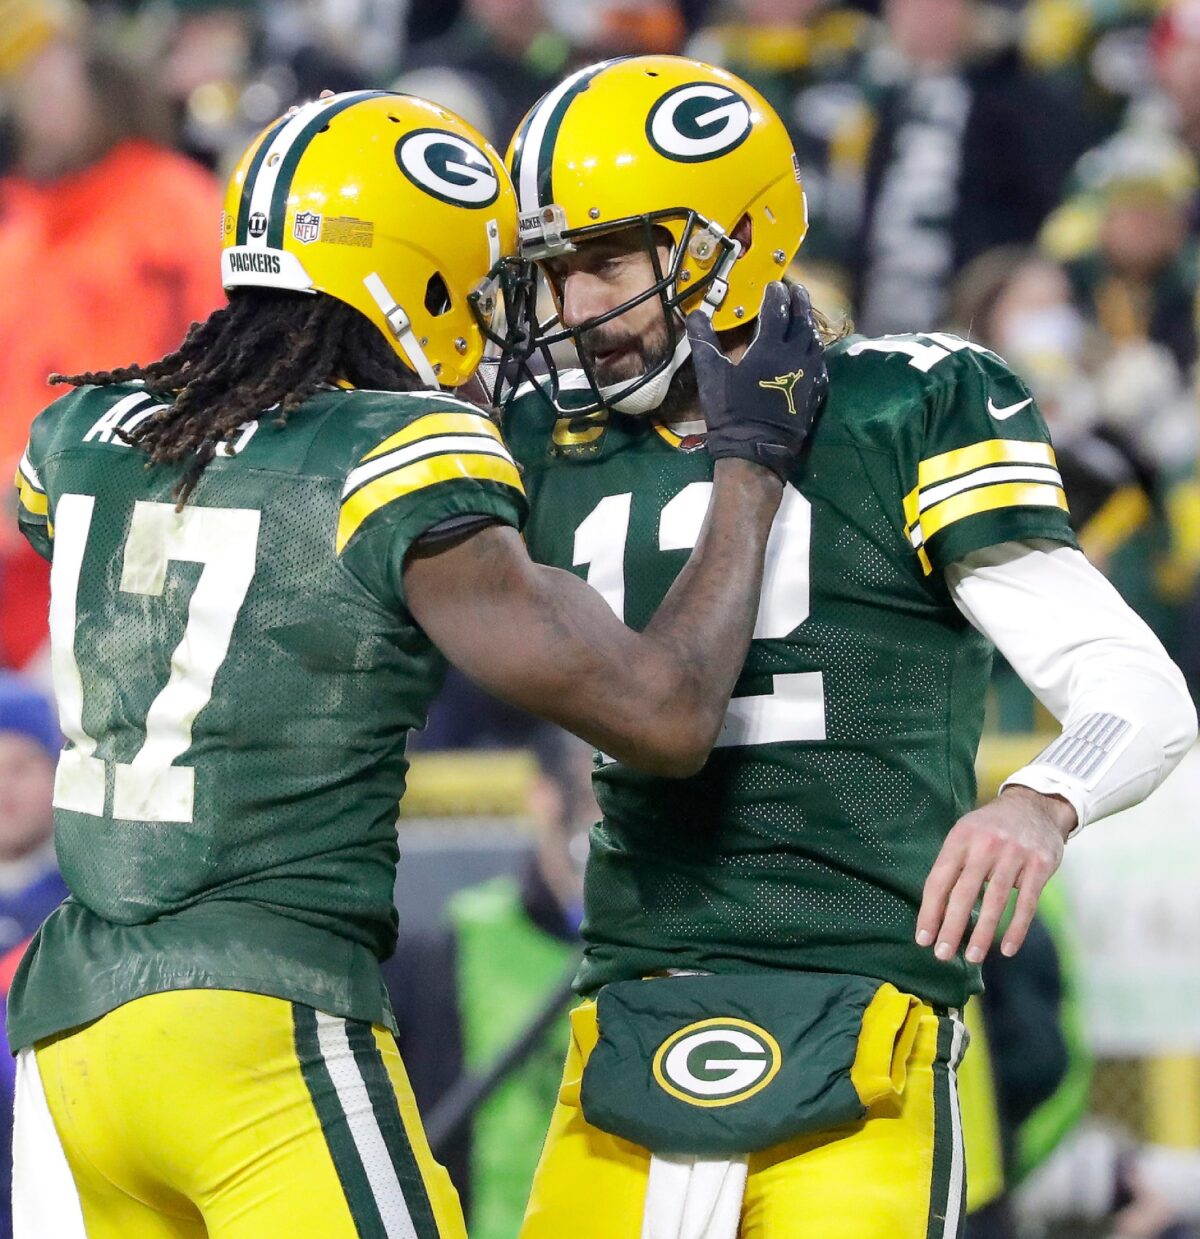 Aaron Rodgers could reunite with Davante Adams if traded to the Raiders